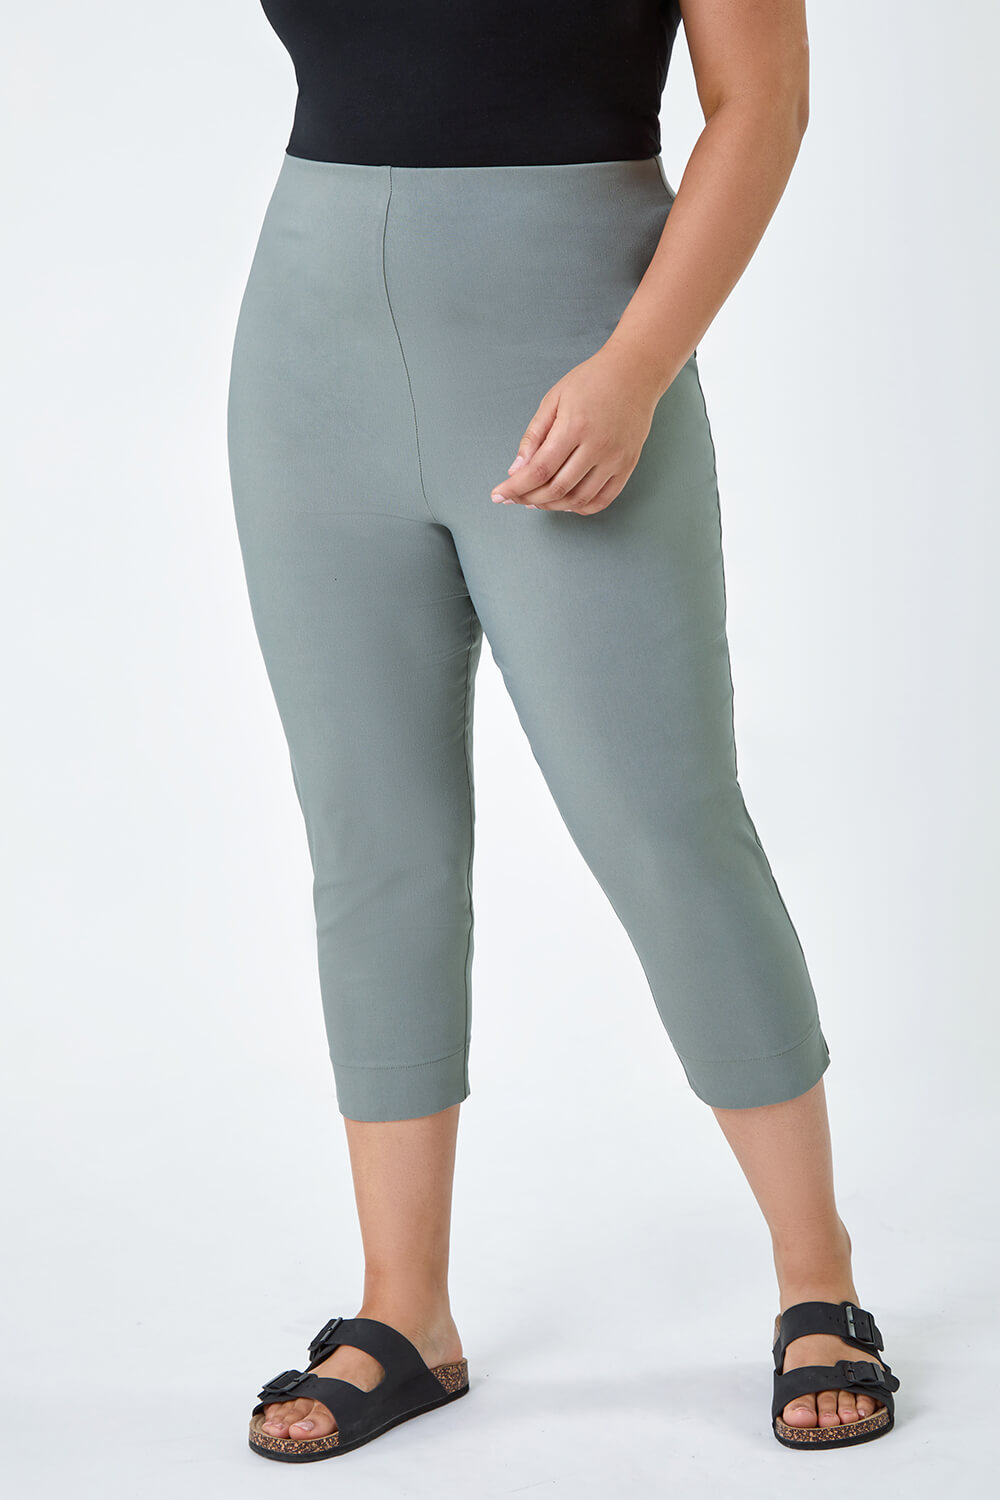 KHAKI Curve Cropped Stretch Trouser, Image 4 of 4